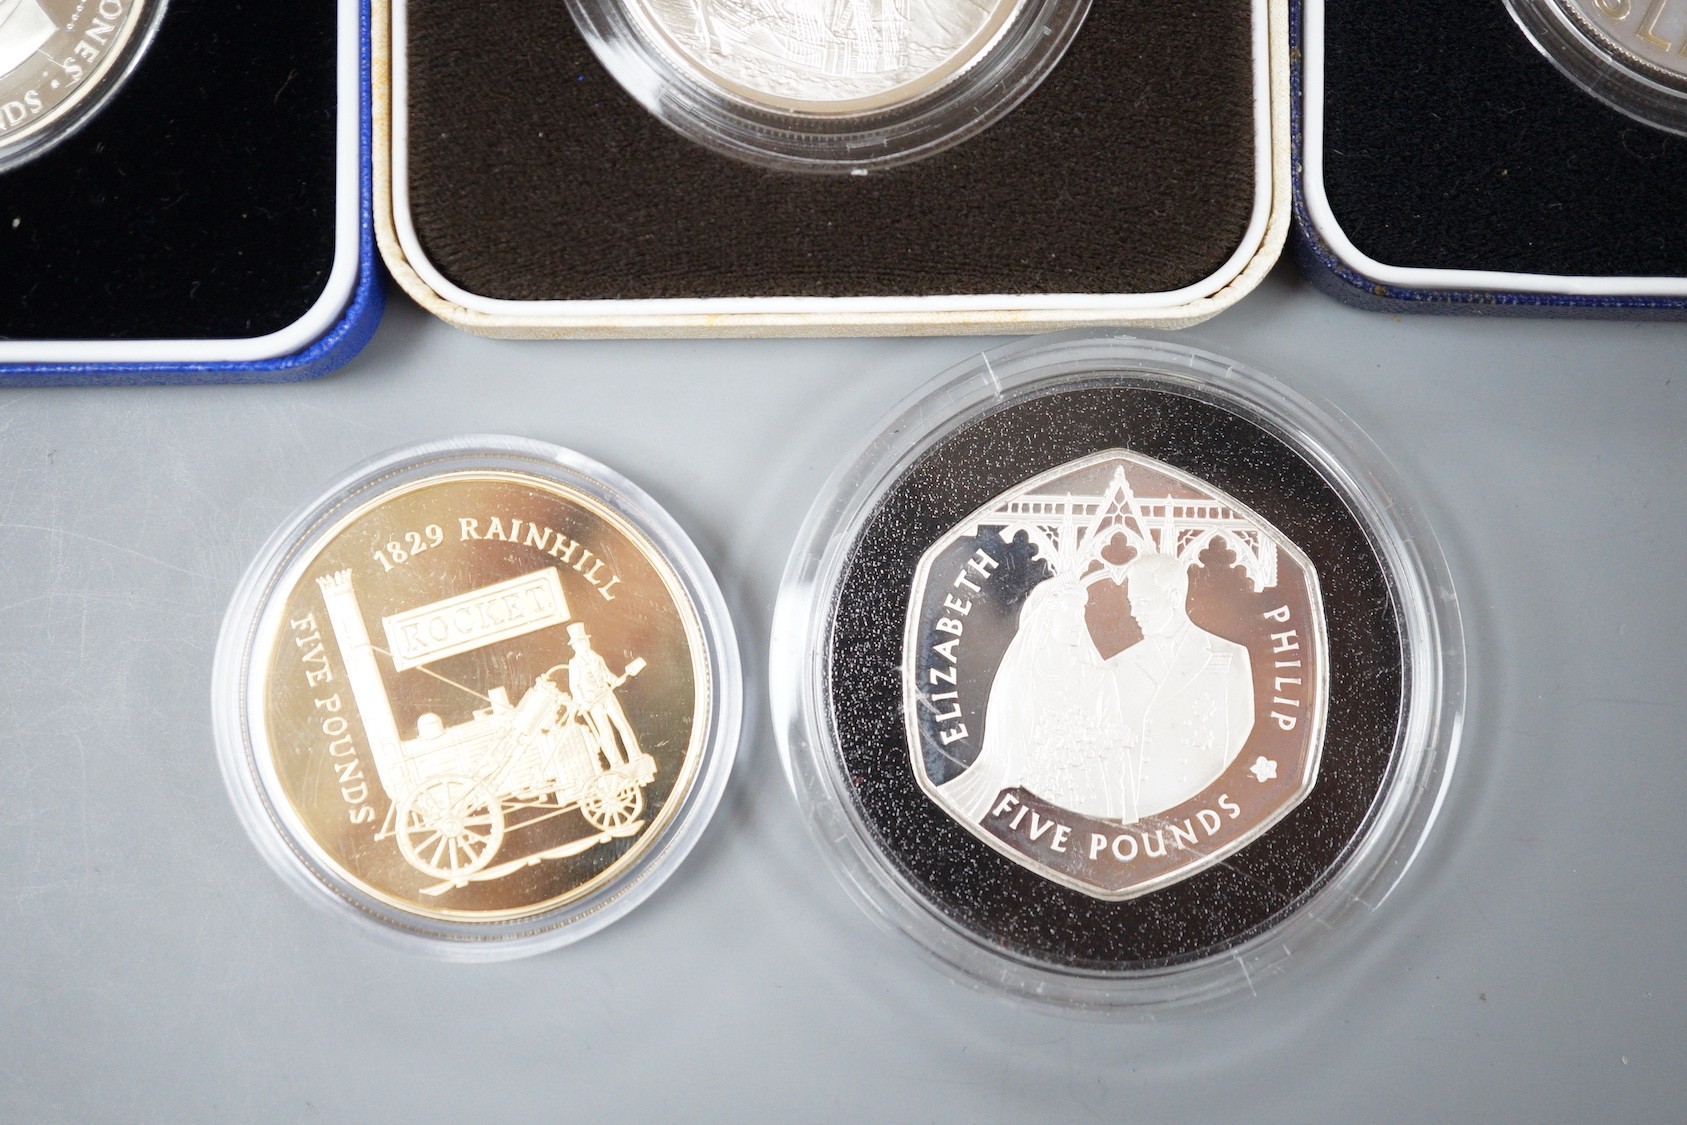 Cased Royal Mint silver proof coins – 2007 Alderney £5, 2006 gilded £5, two 1989 Pitcairn Islands $1 and 1999 Guernsey £5 (5)